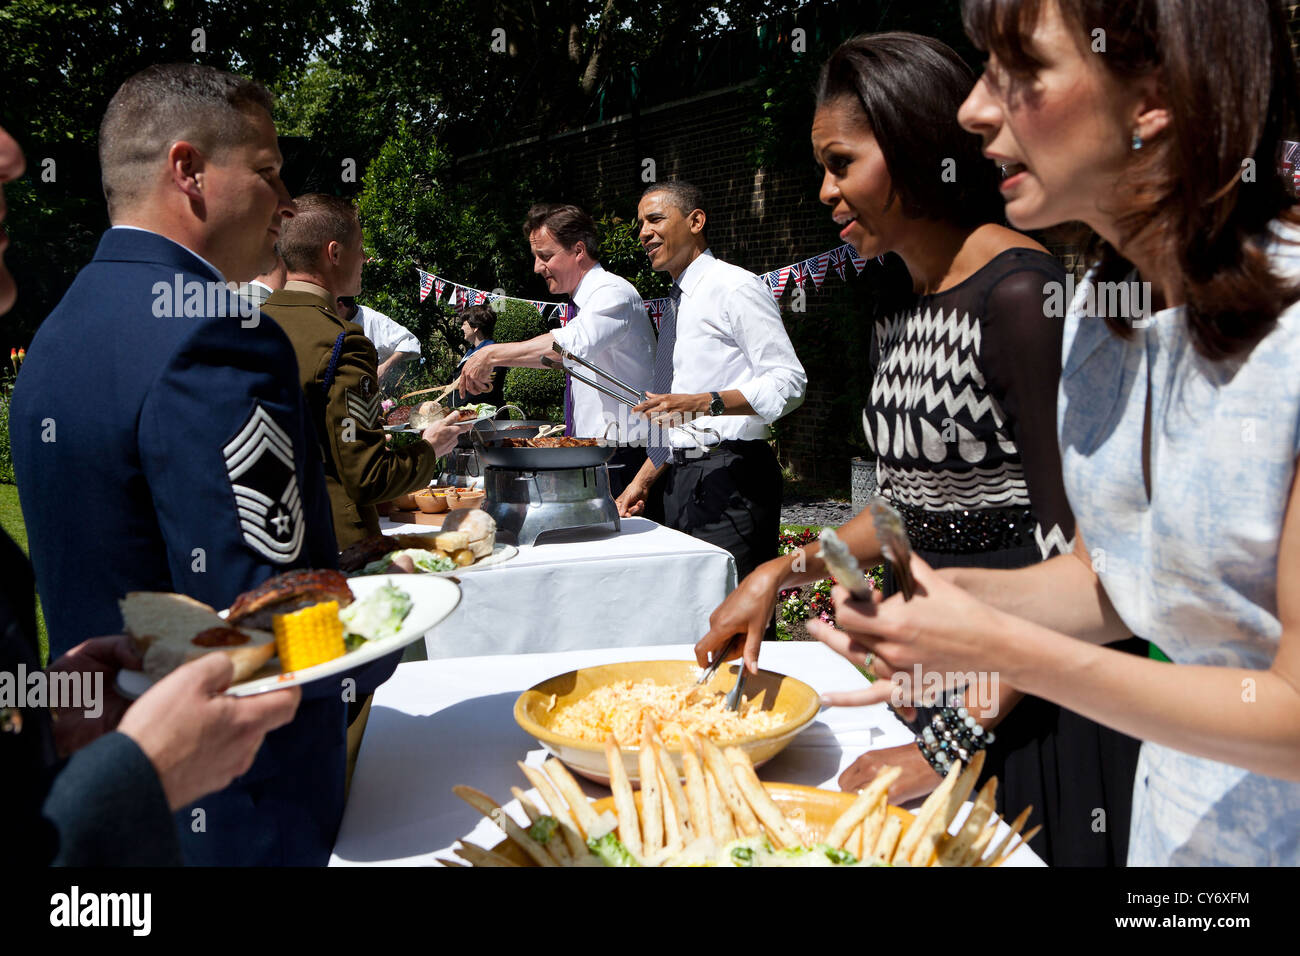 US President Barack Obama, British Prime Minister David Cameron, First Lady Michelle Obama, and Samantha Cameron serve military families during a barbecue in the garden at 10 Downing Street May 25, 2011 in London, England. Stock Photo